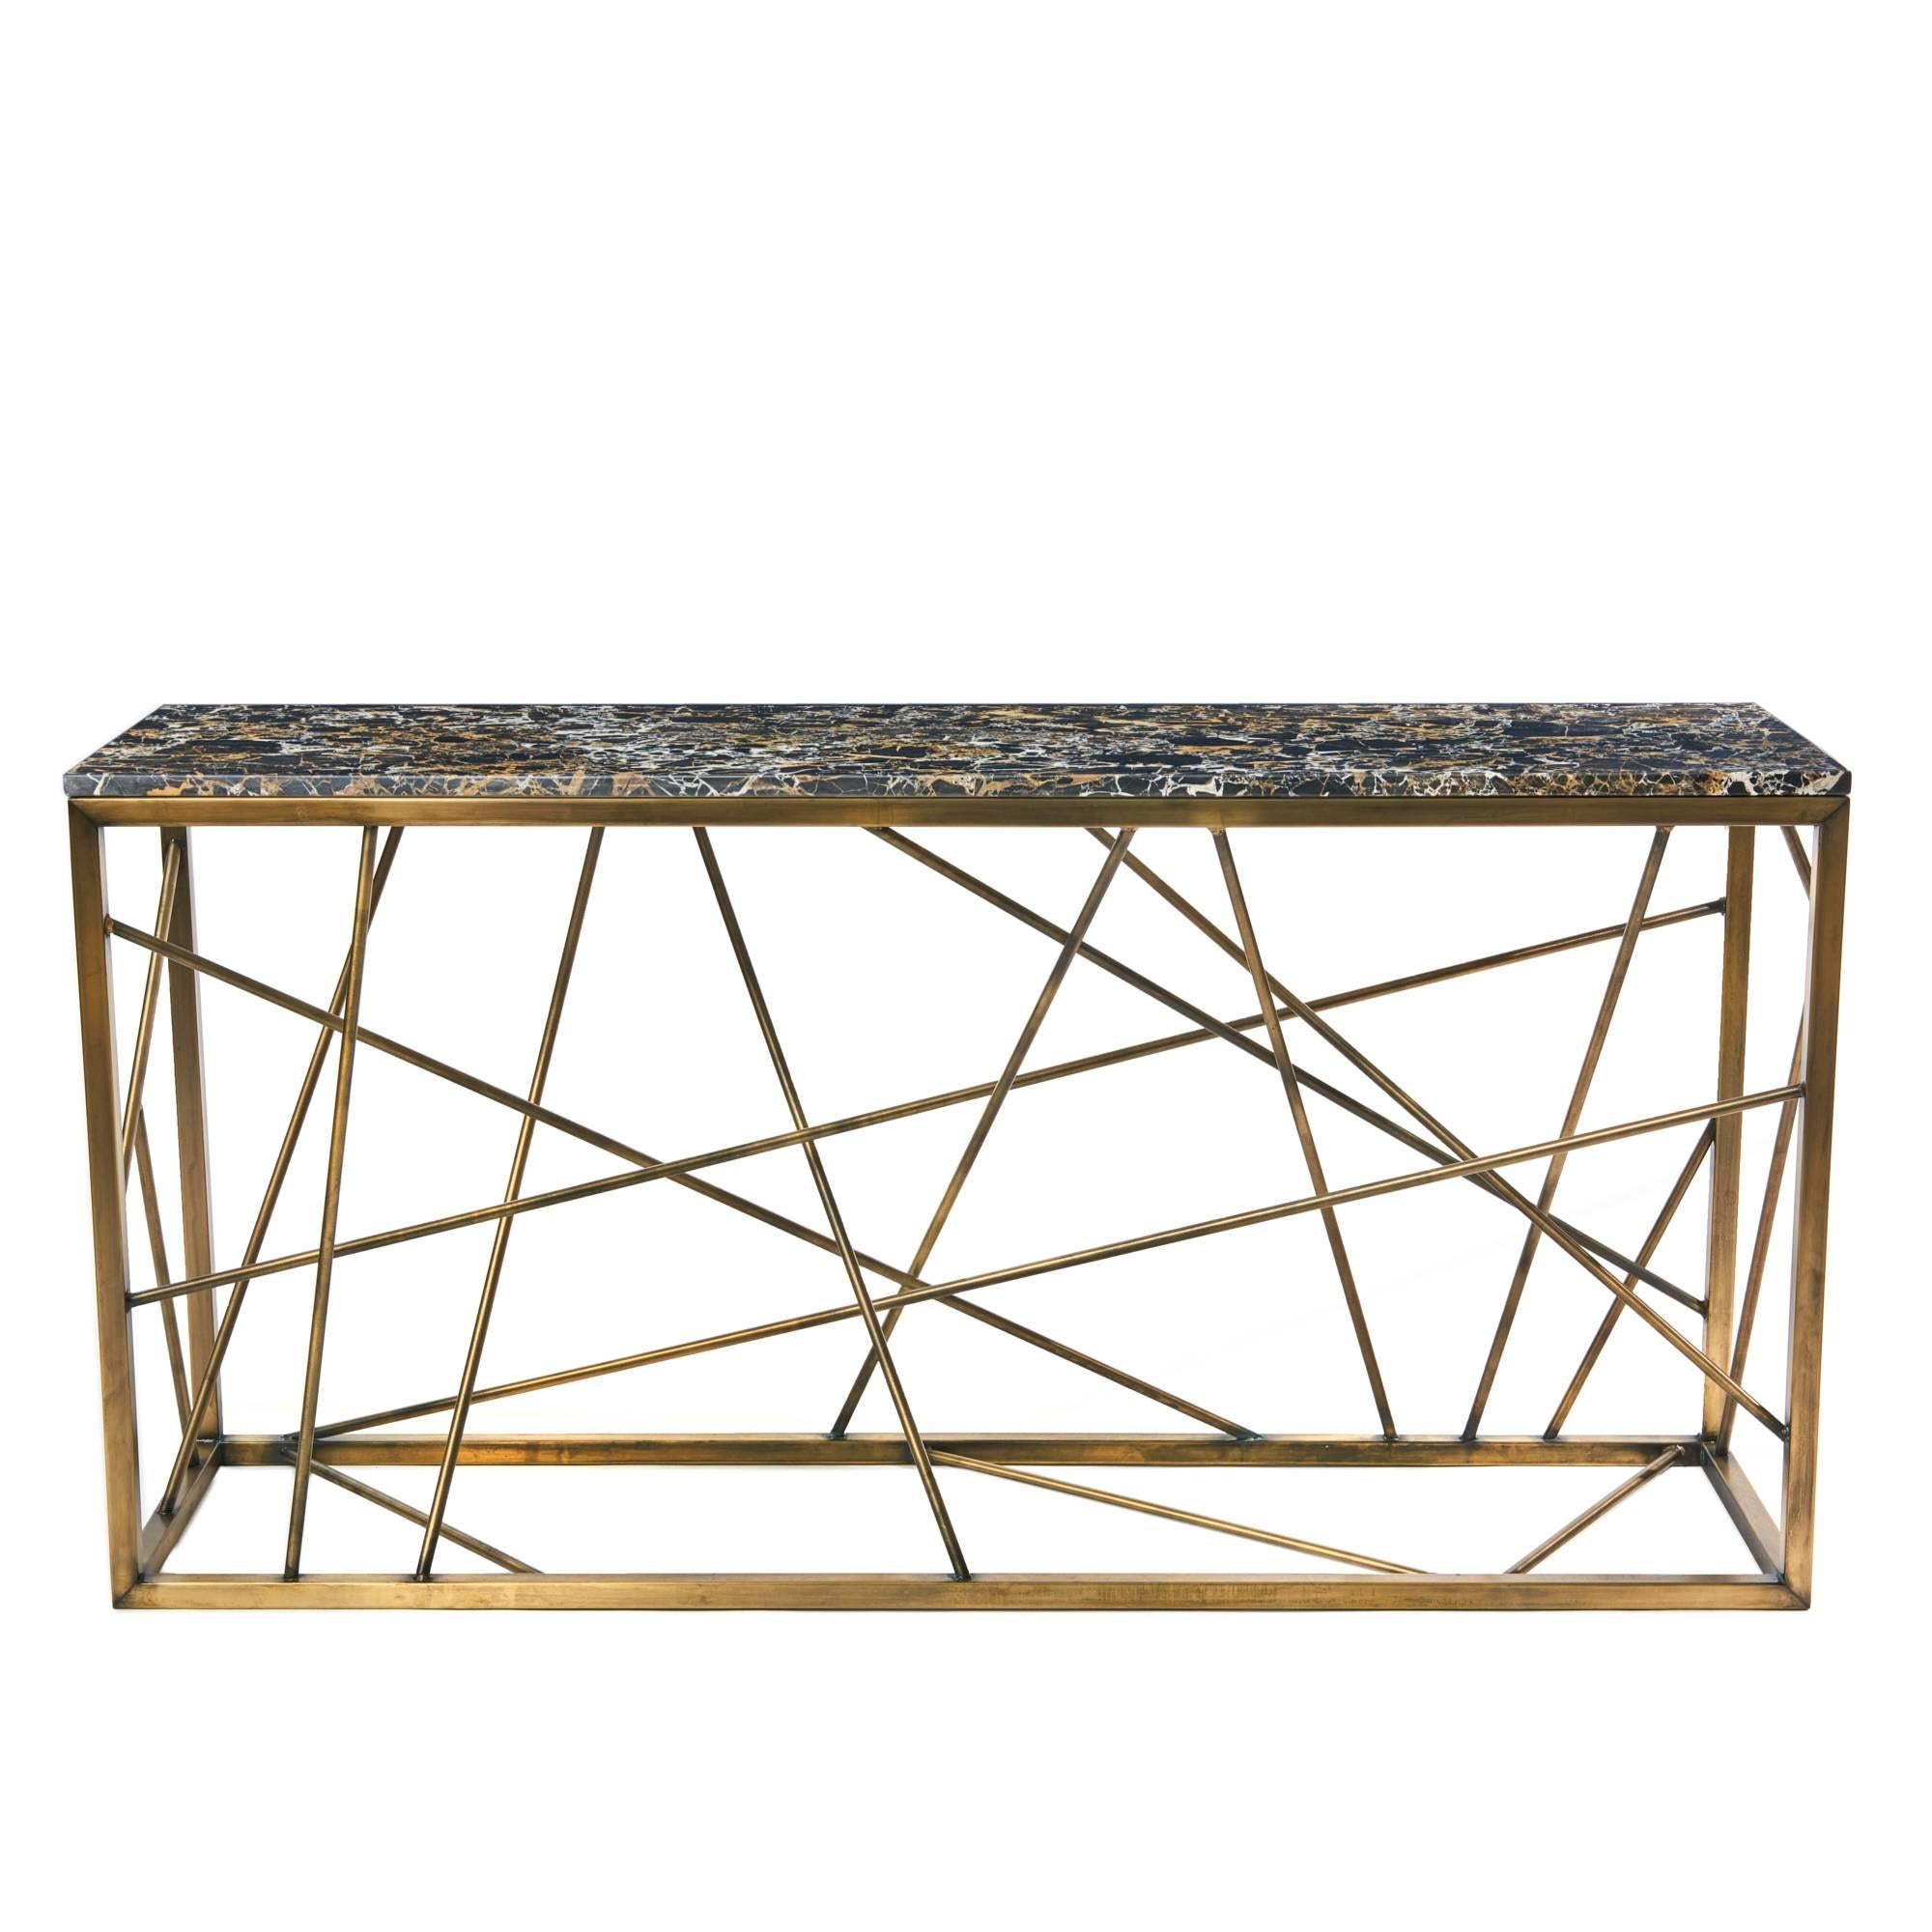 Nest Console by Morgan Clayhall, Sculptural Console, Steel and Marble Table (Kanadisch) im Angebot